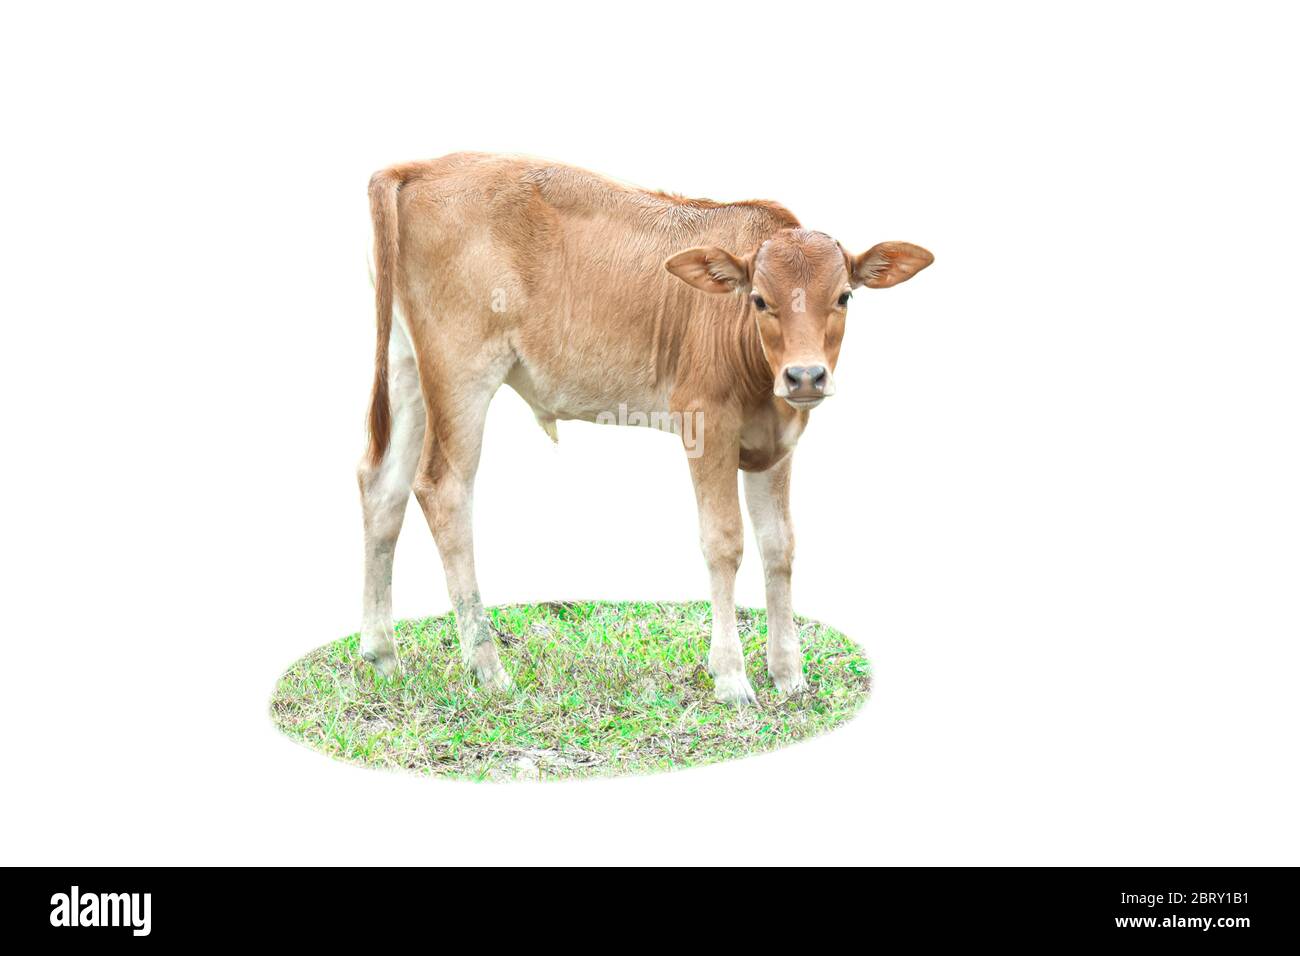 Calf cow on grass isolated on white background. Stock Photo